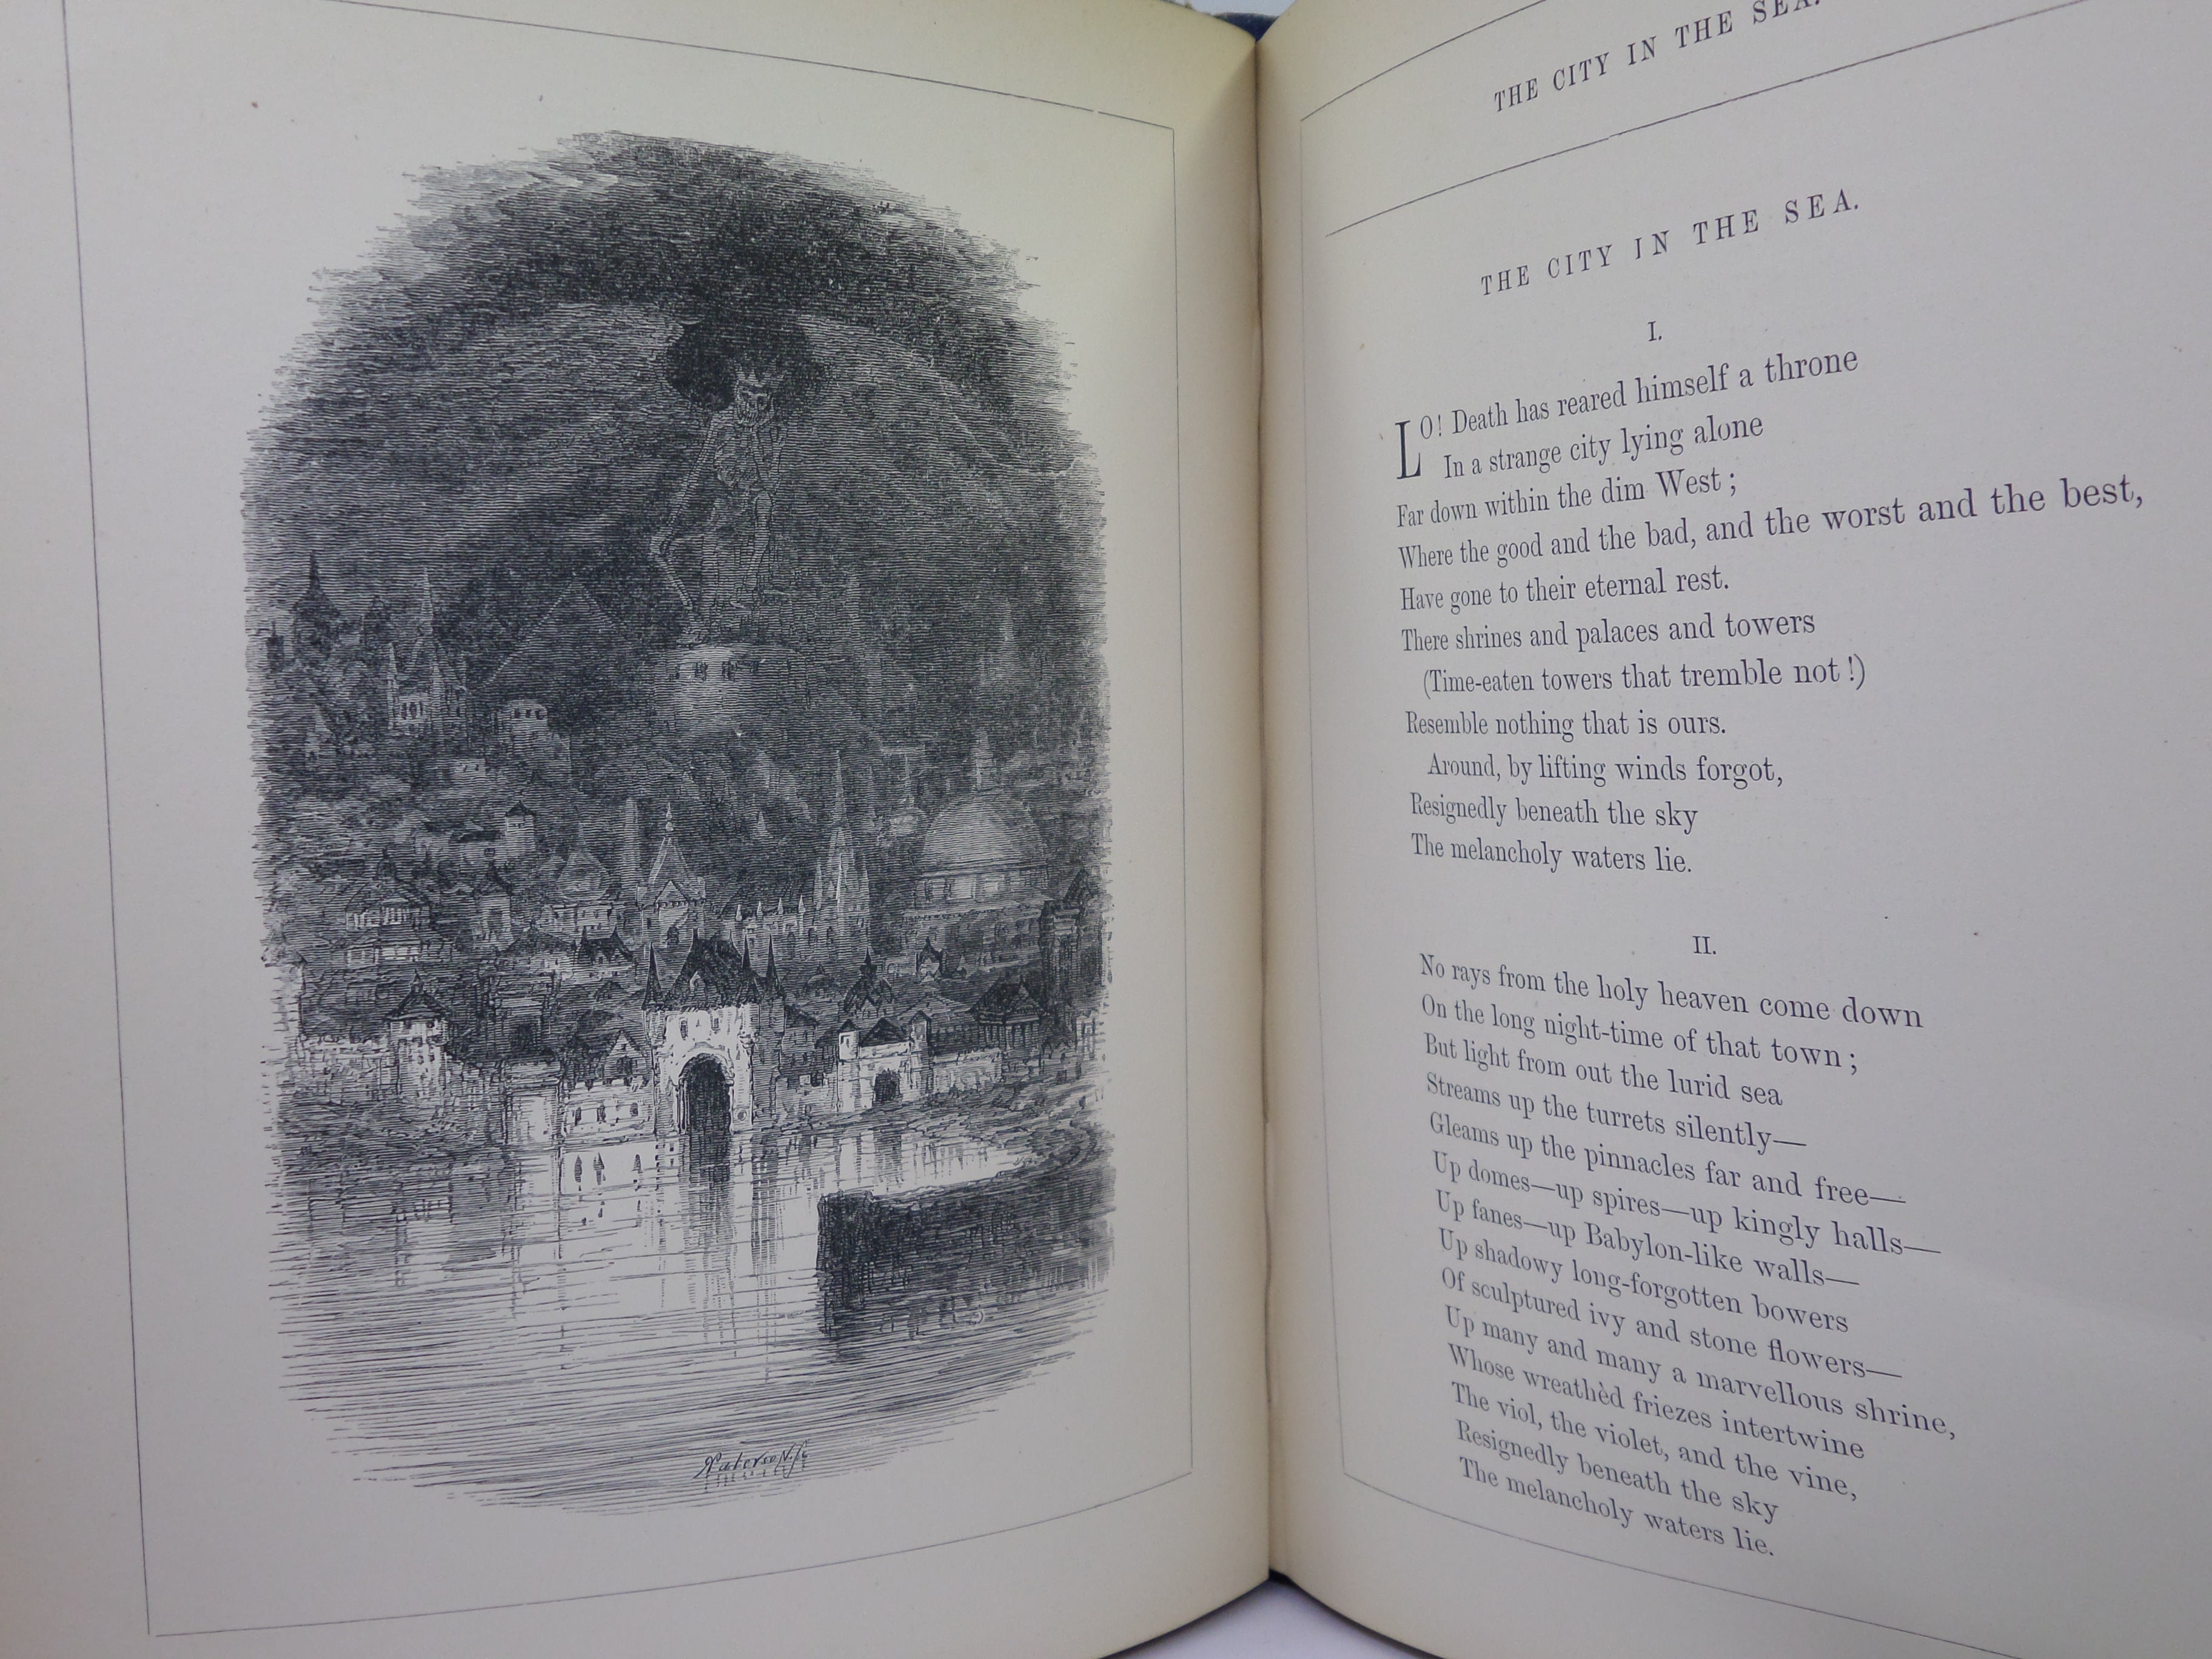 THE POETICAL WORKS OF EDGAR ALLAN POE 1872 ILLUSTRATED